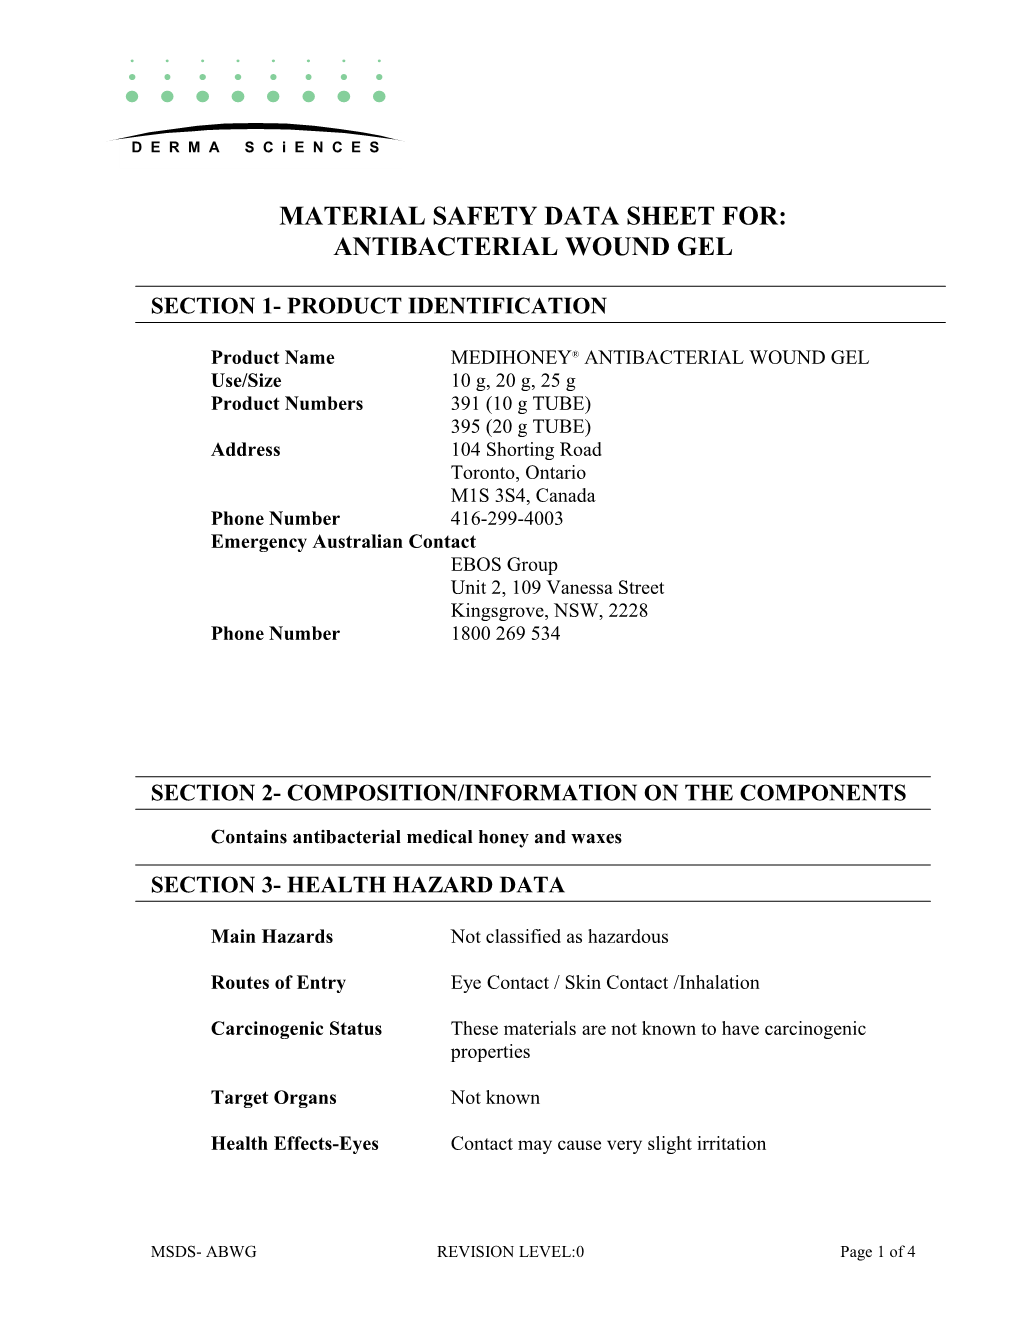 Material Safety Data Sheet For: Antibacterial Wound Gel